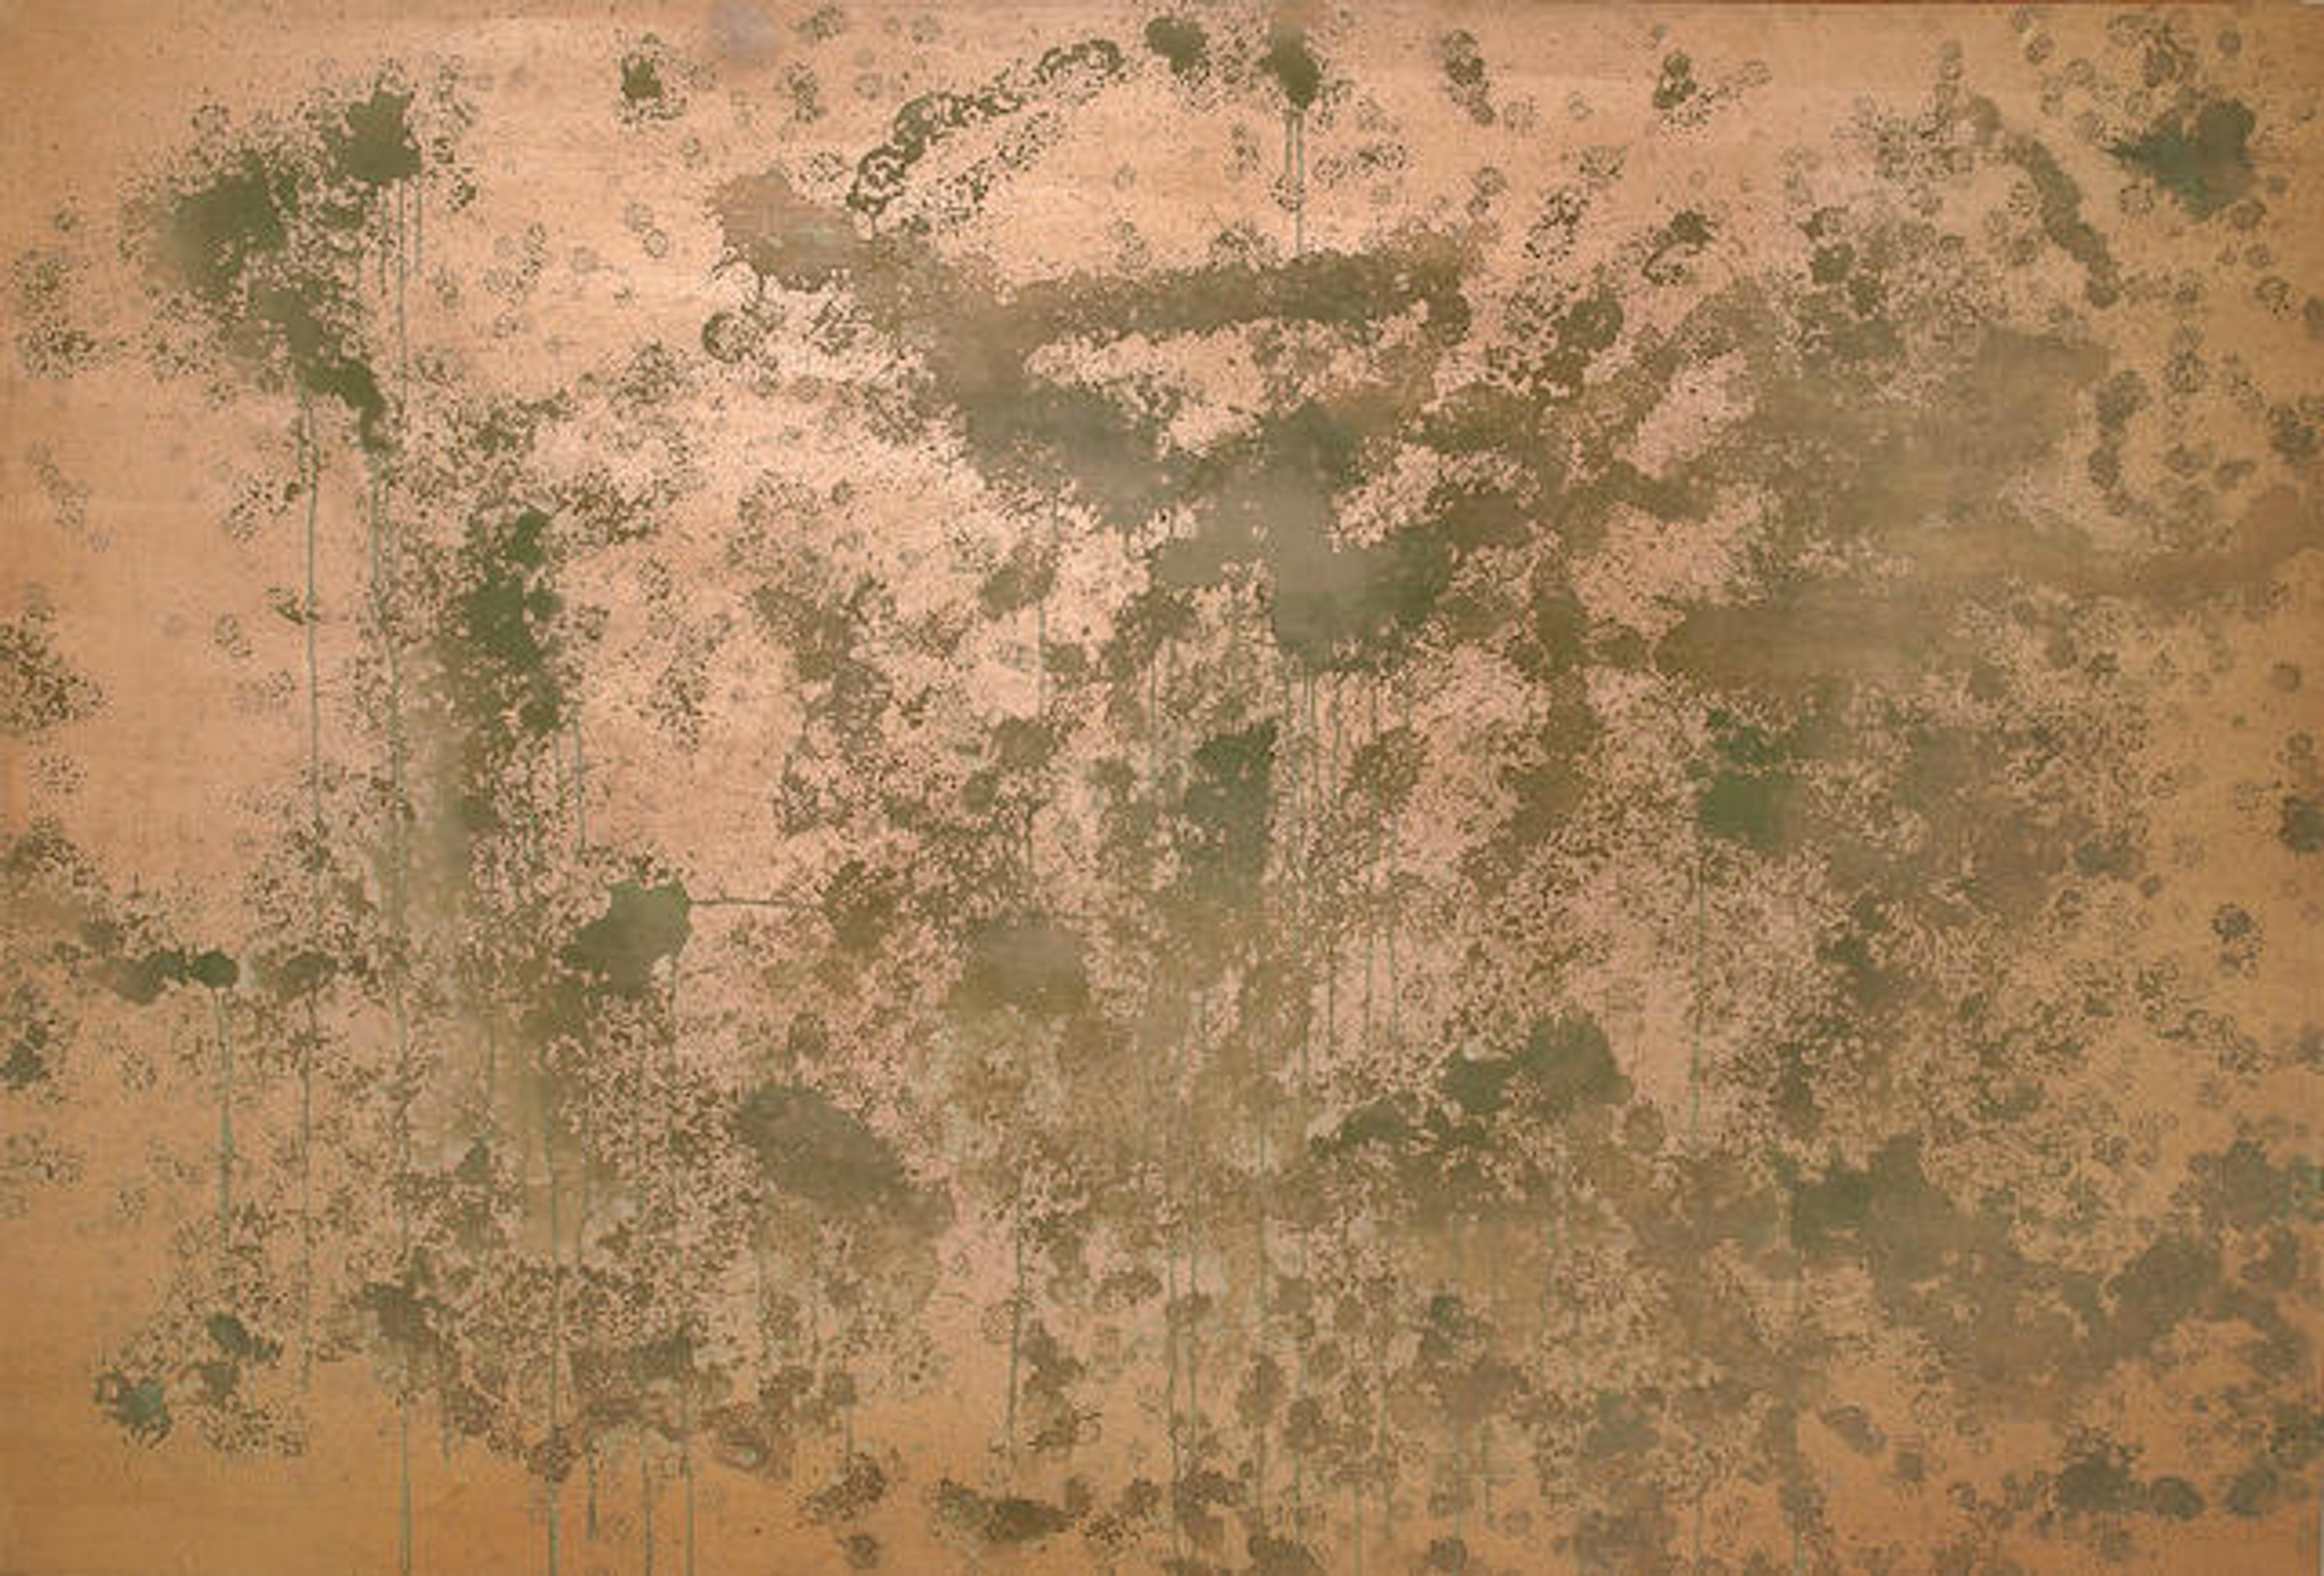 Warhol's oxidation painting shows a bright coppery background, stained with drips of green and brown, caused by urine oxidating.